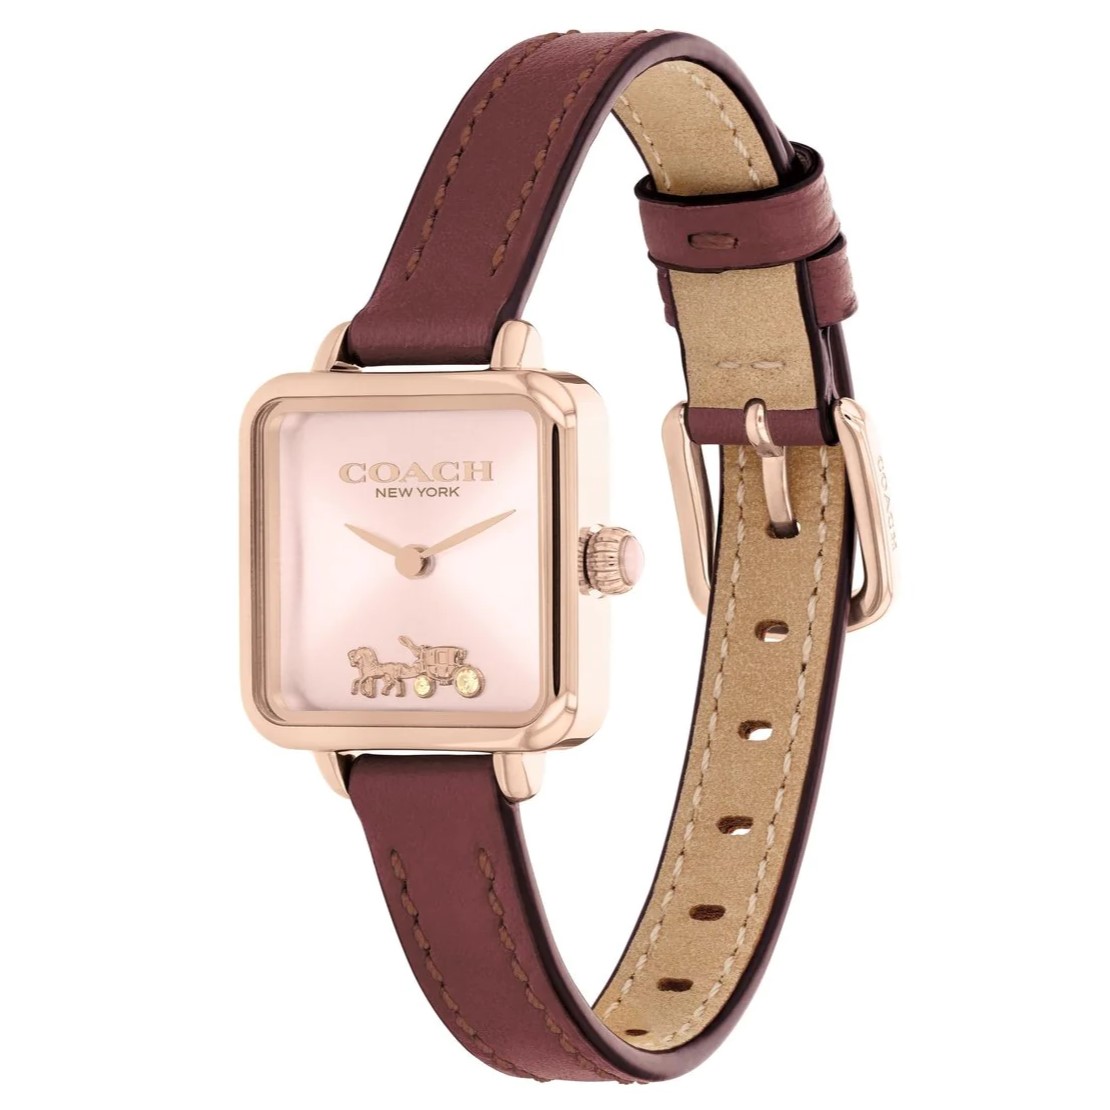 ĐỒNG HỒ ĐEO TAY DÂY DA COACH CASS PINK QUARTZ ROSE GOLD CASE AND BURGUNDY LEATHER STRAP WATCH 2